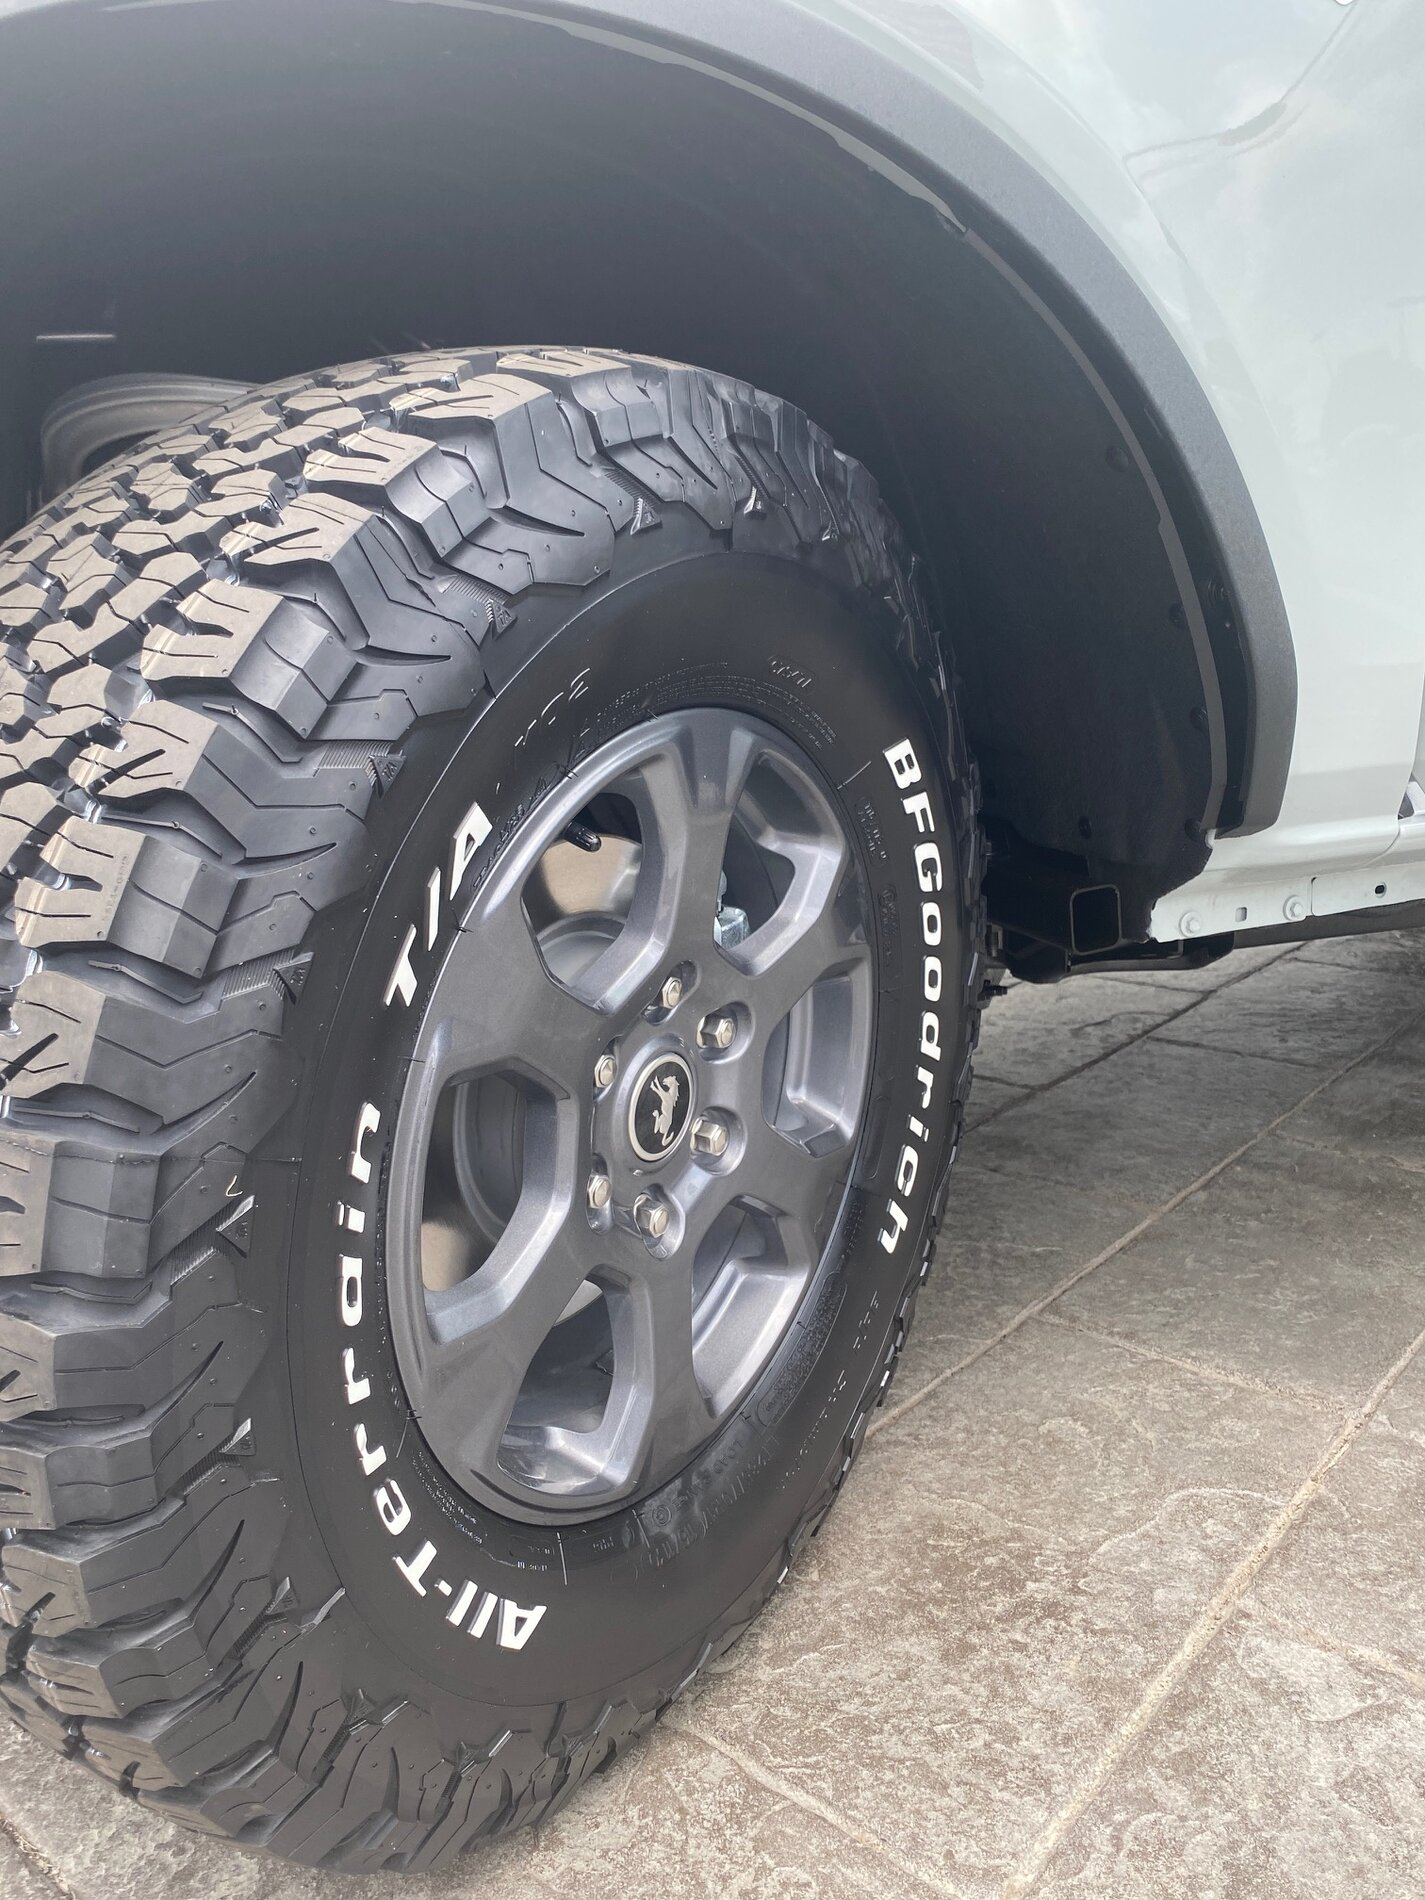 Ford Bronco 33's tires fit Big Bend! As tested on my 2021 Bronco 1624844069951